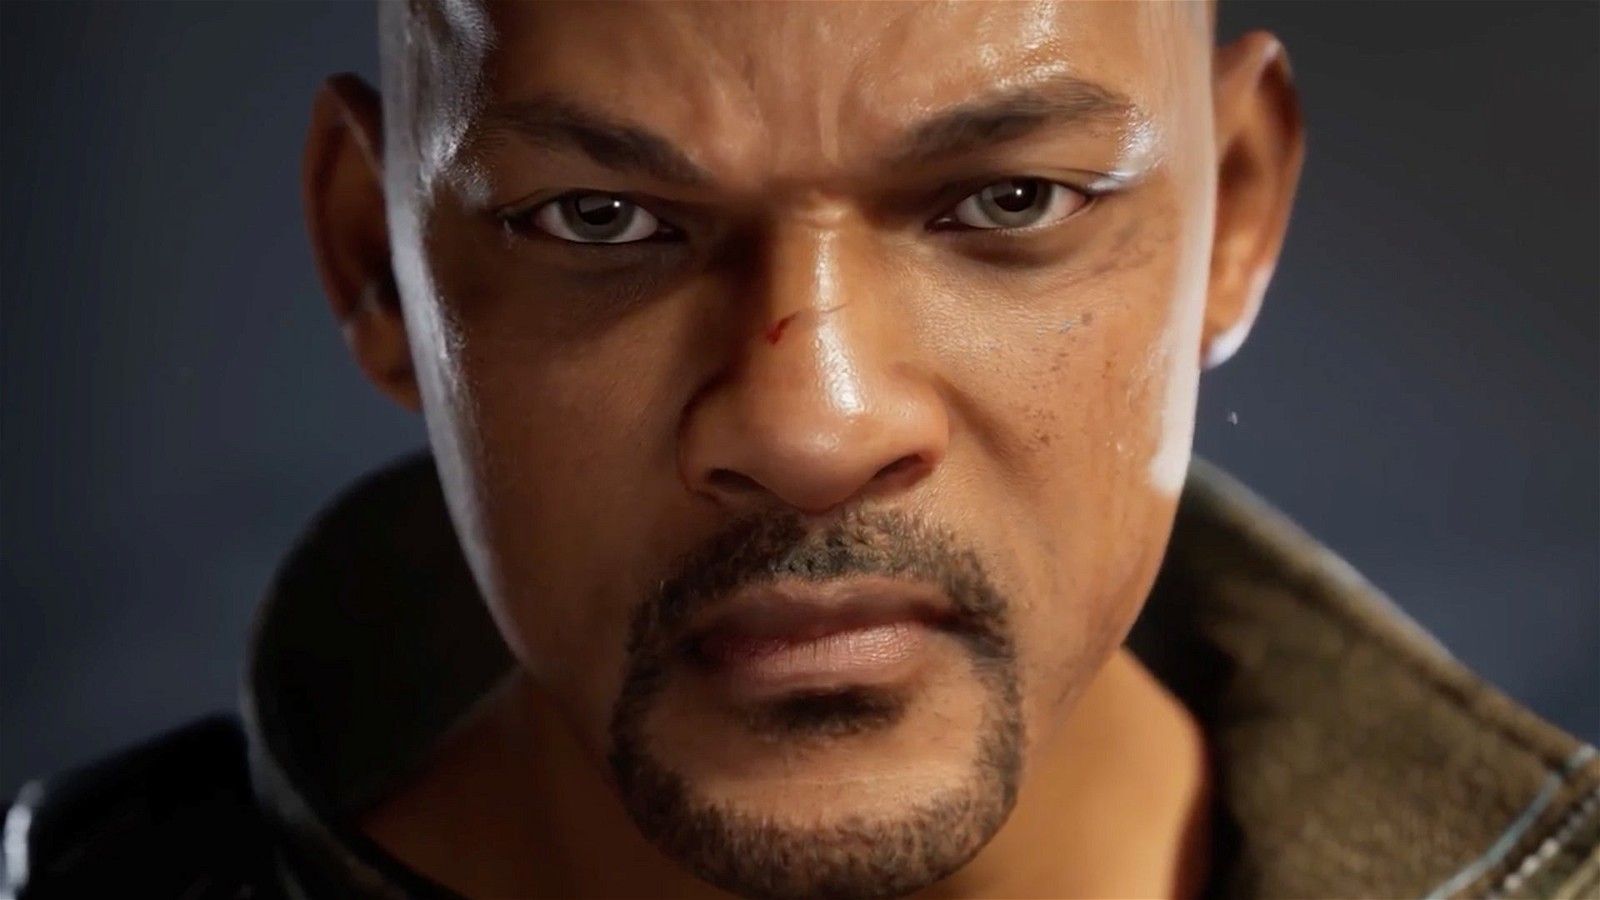 Will Smith played the character Trey Jones in the game Undawn